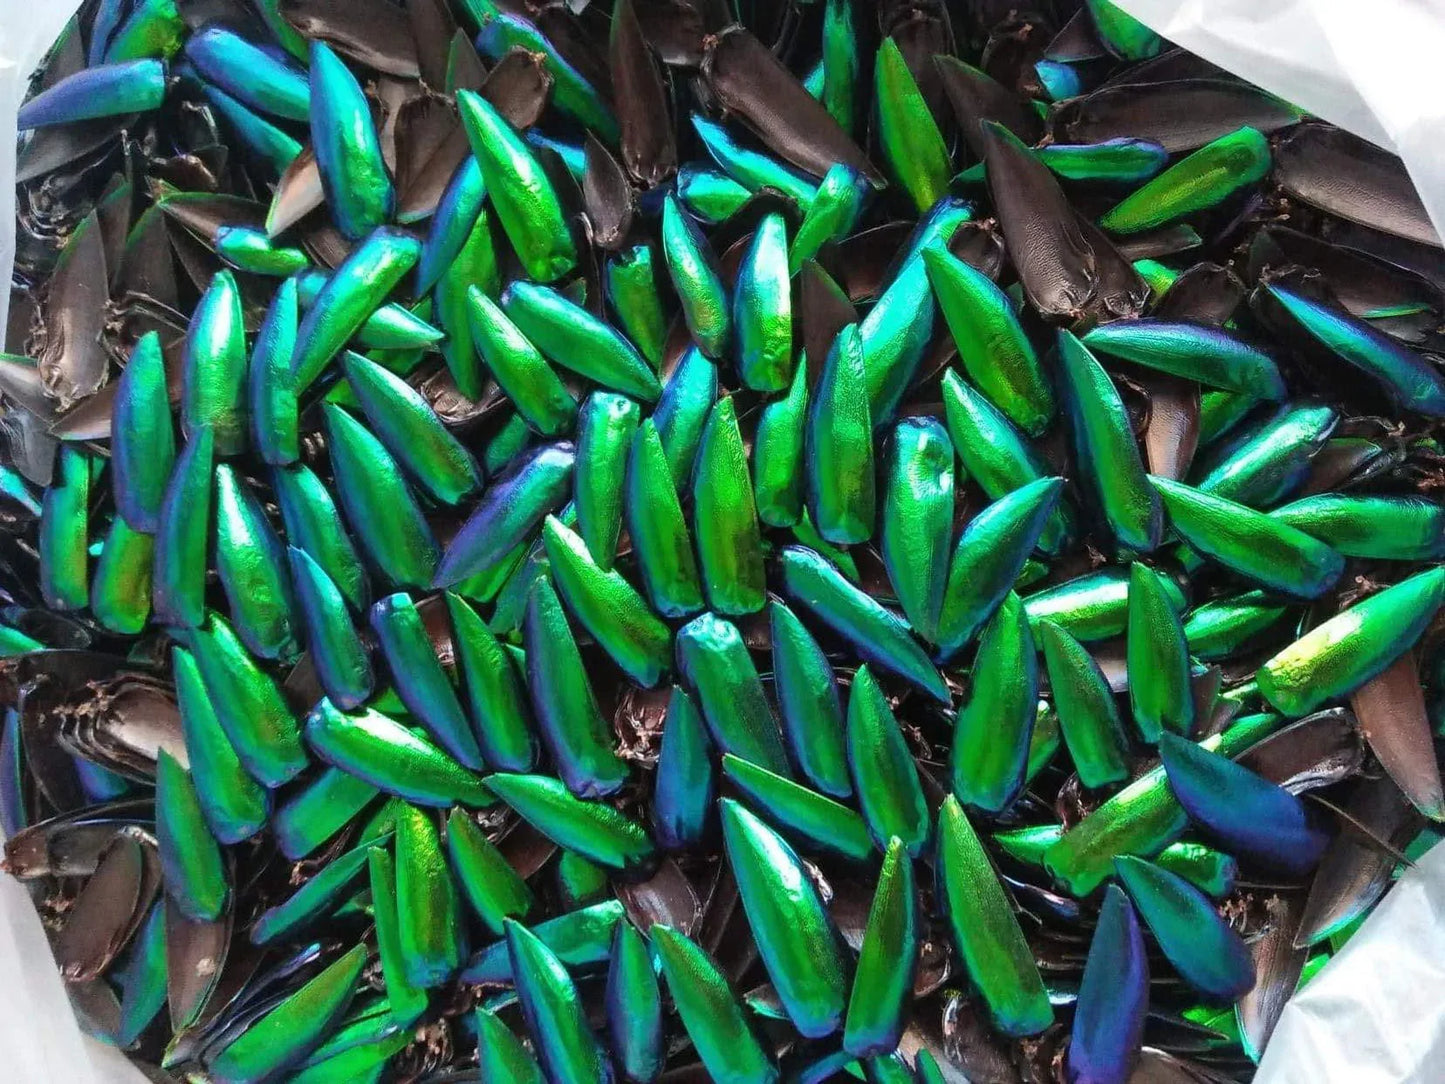 Jewel Beetle Wings UNDRILLED NO-HOLE Taxidermy Beads (100 Wings)